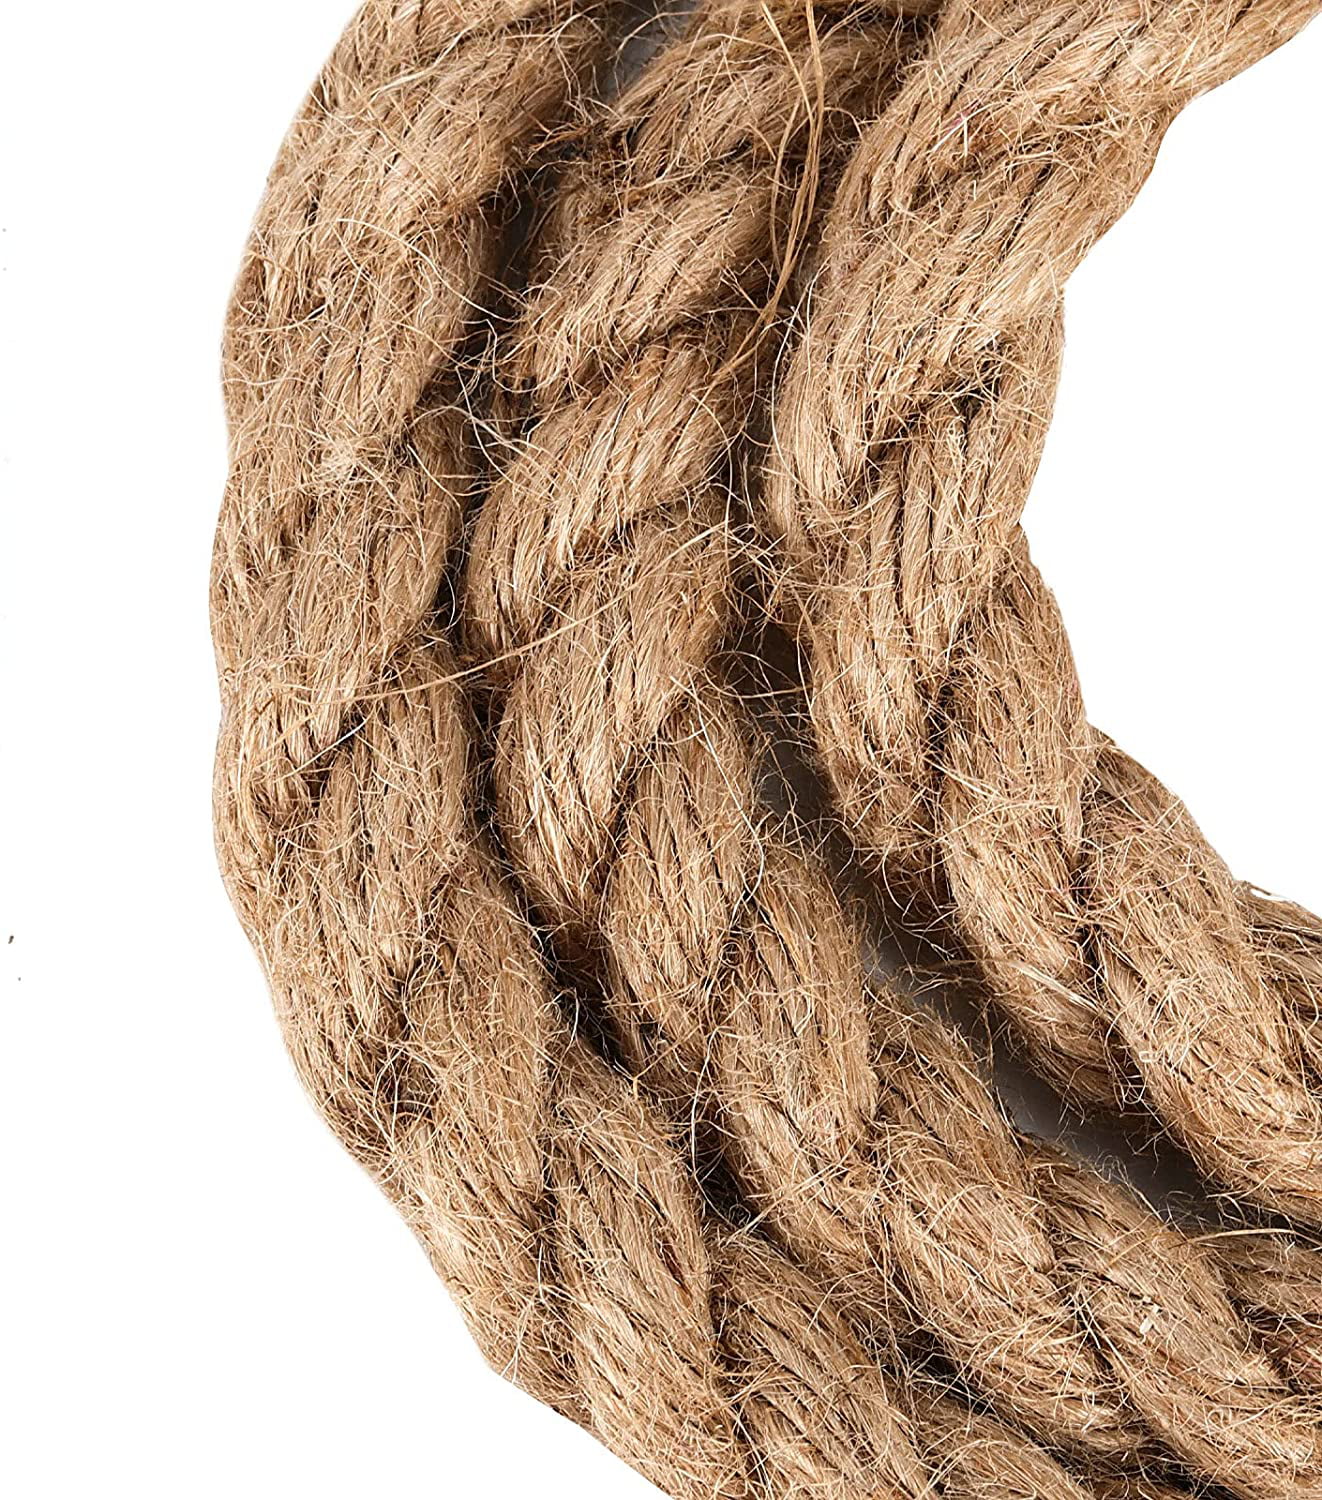  JOIKIT 1/2 Inch 164 Feet Natural Jute Rope, 12mm Thick